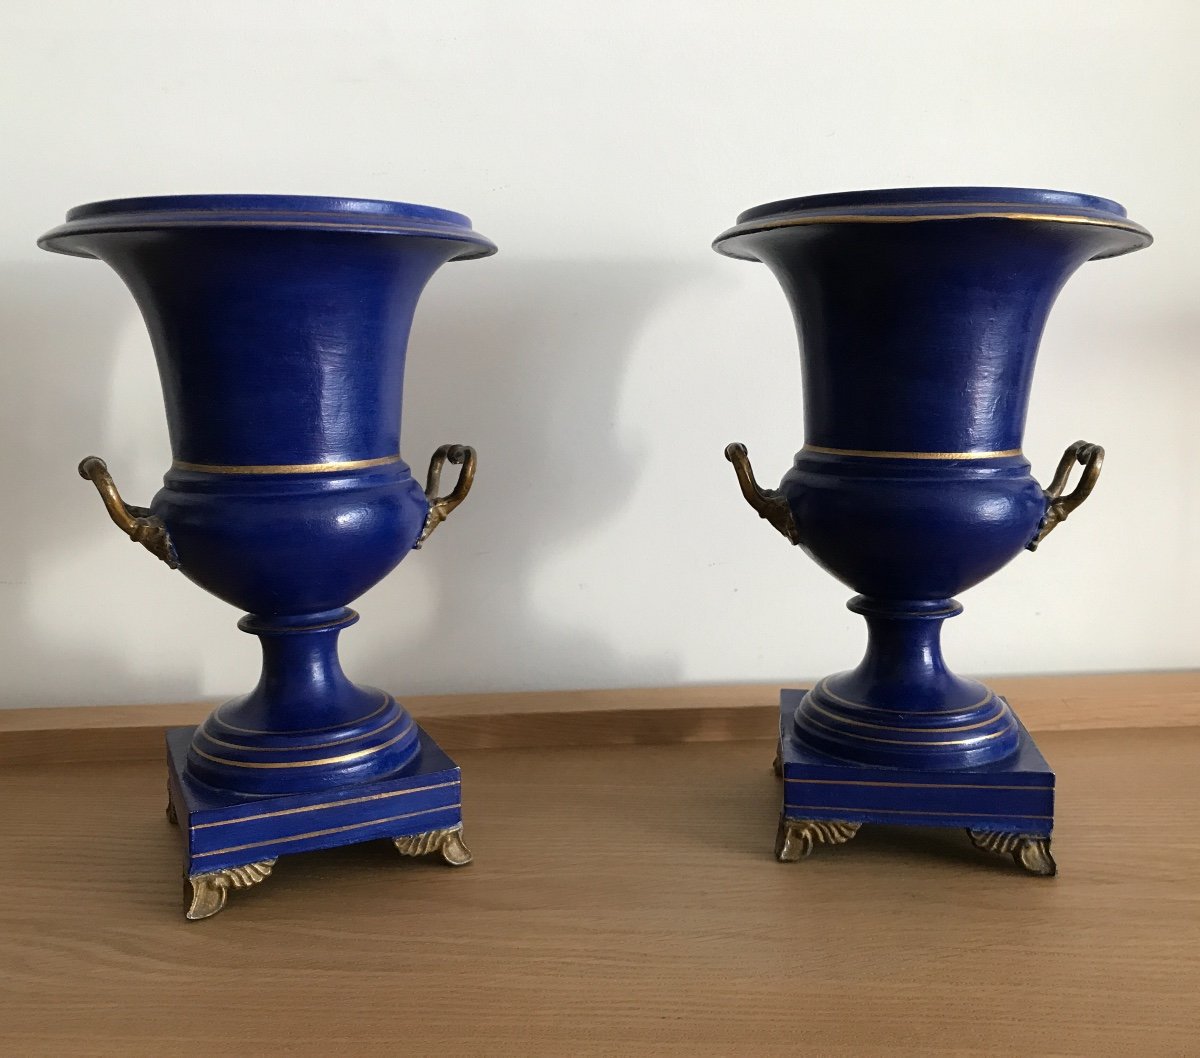 Pair Of Medecis Shaped Vases In Painted Sheet From The 19th Time